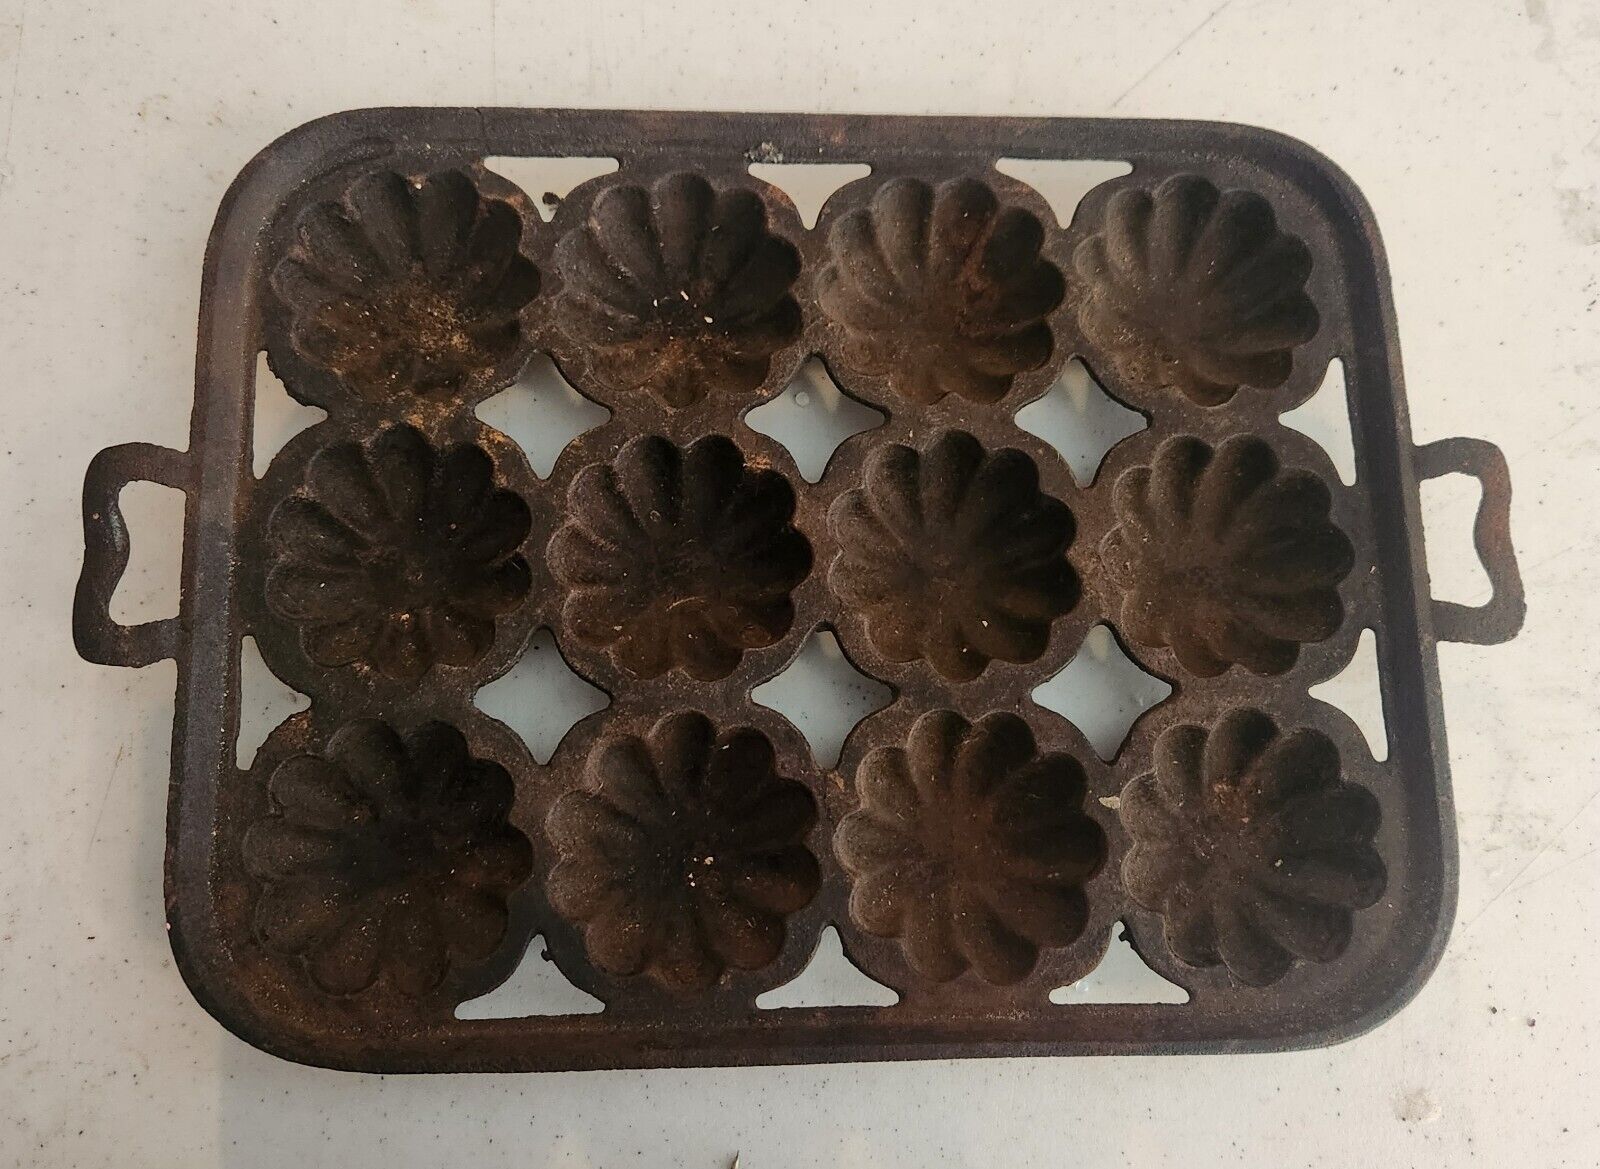 Wagner Unmarked Turks Head 12 Portion Cast Iron Muffin Pan